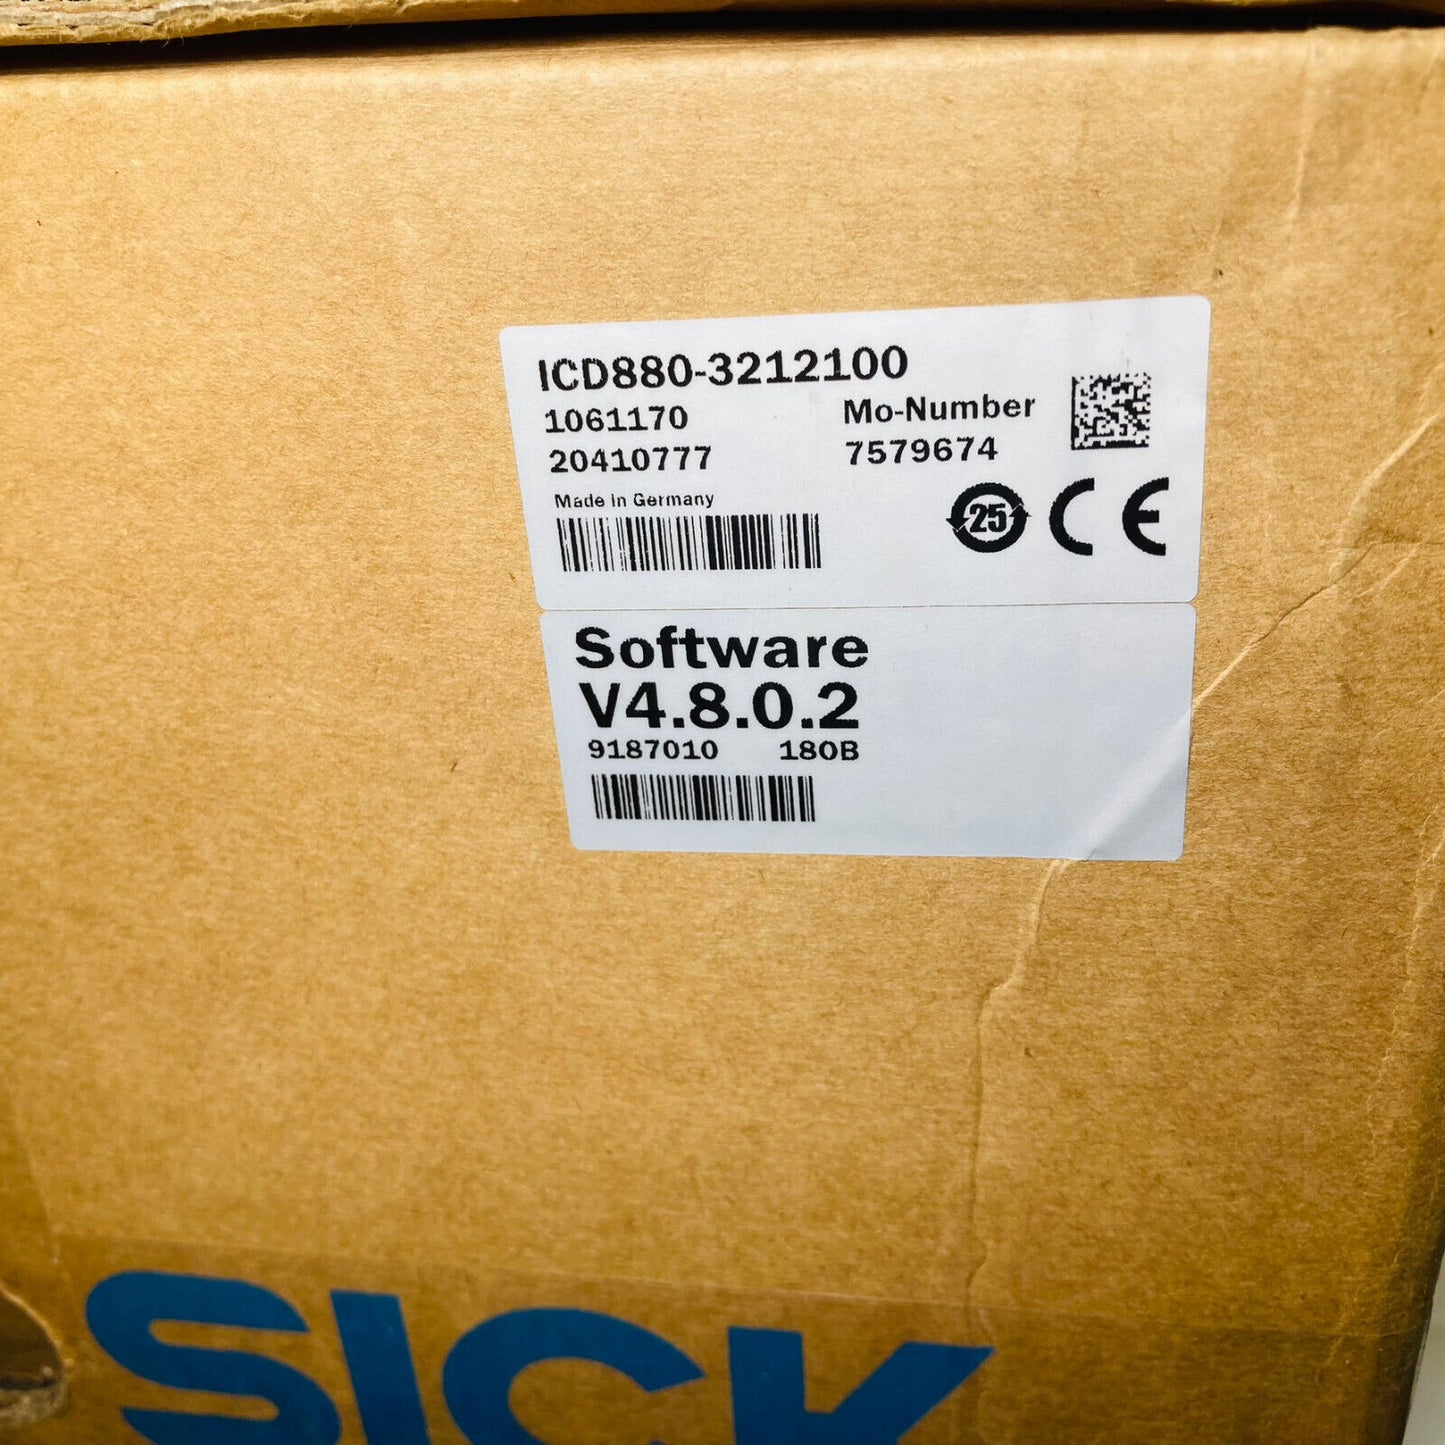 Sick ICD880-3212100 / 1061170 Reader, New in box